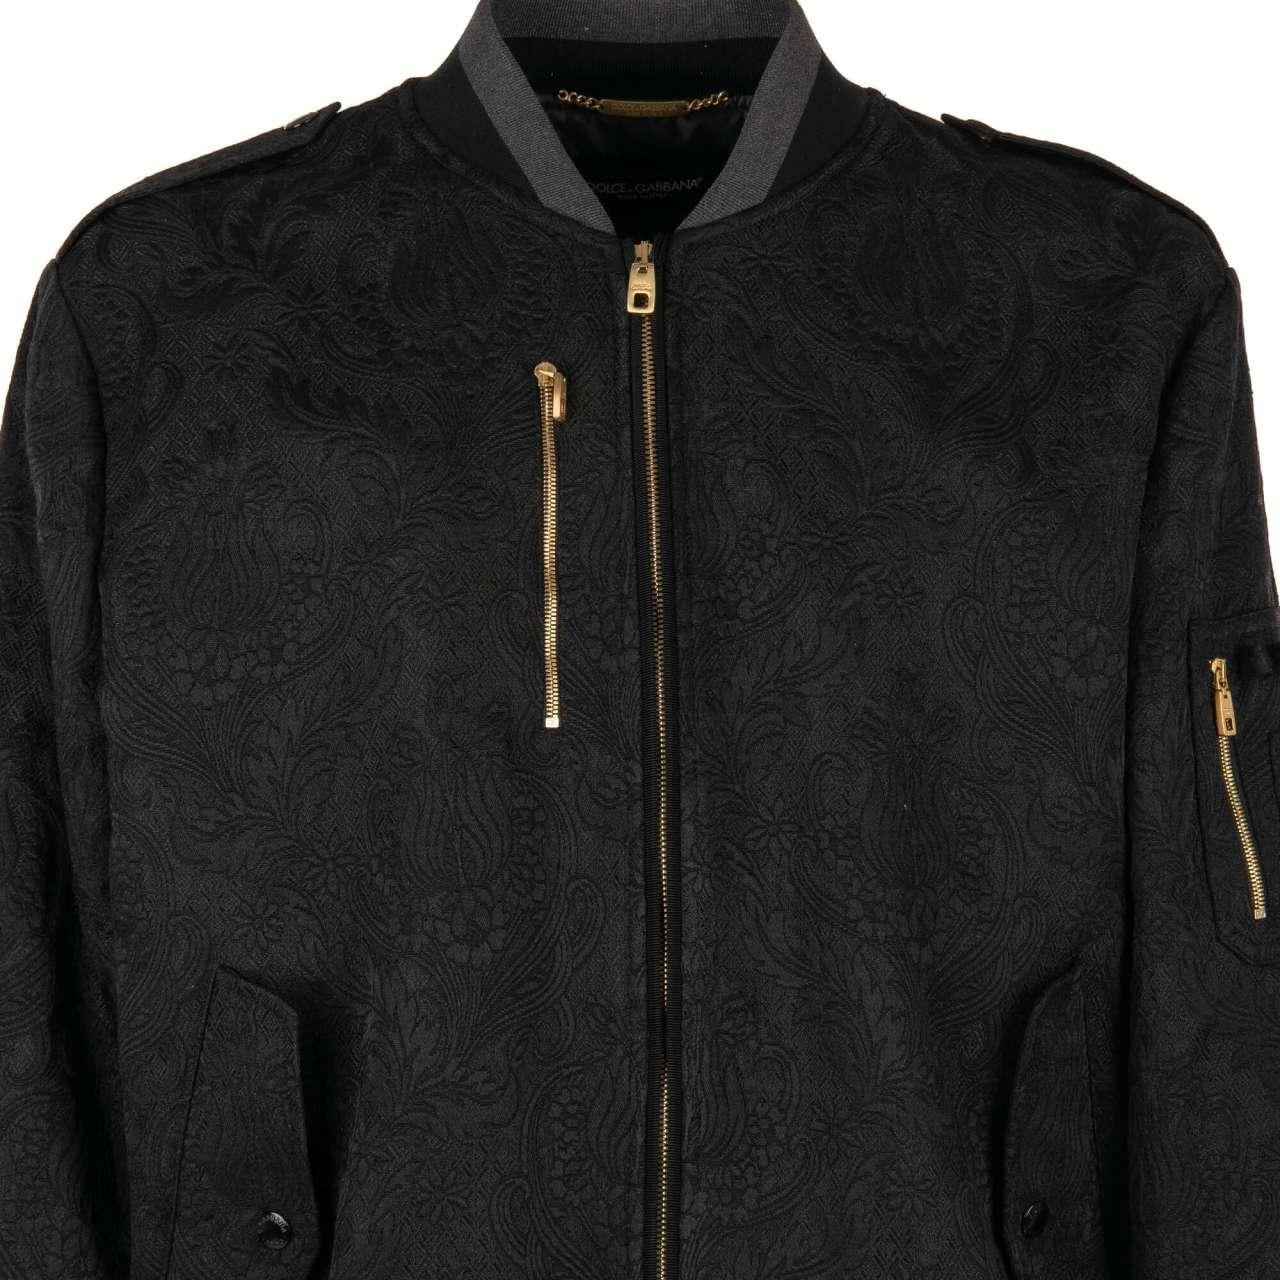 Men's Dolce & Gabbana Brocade Bomber Jacket with Zip Closure and Pockets Black 56 For Sale